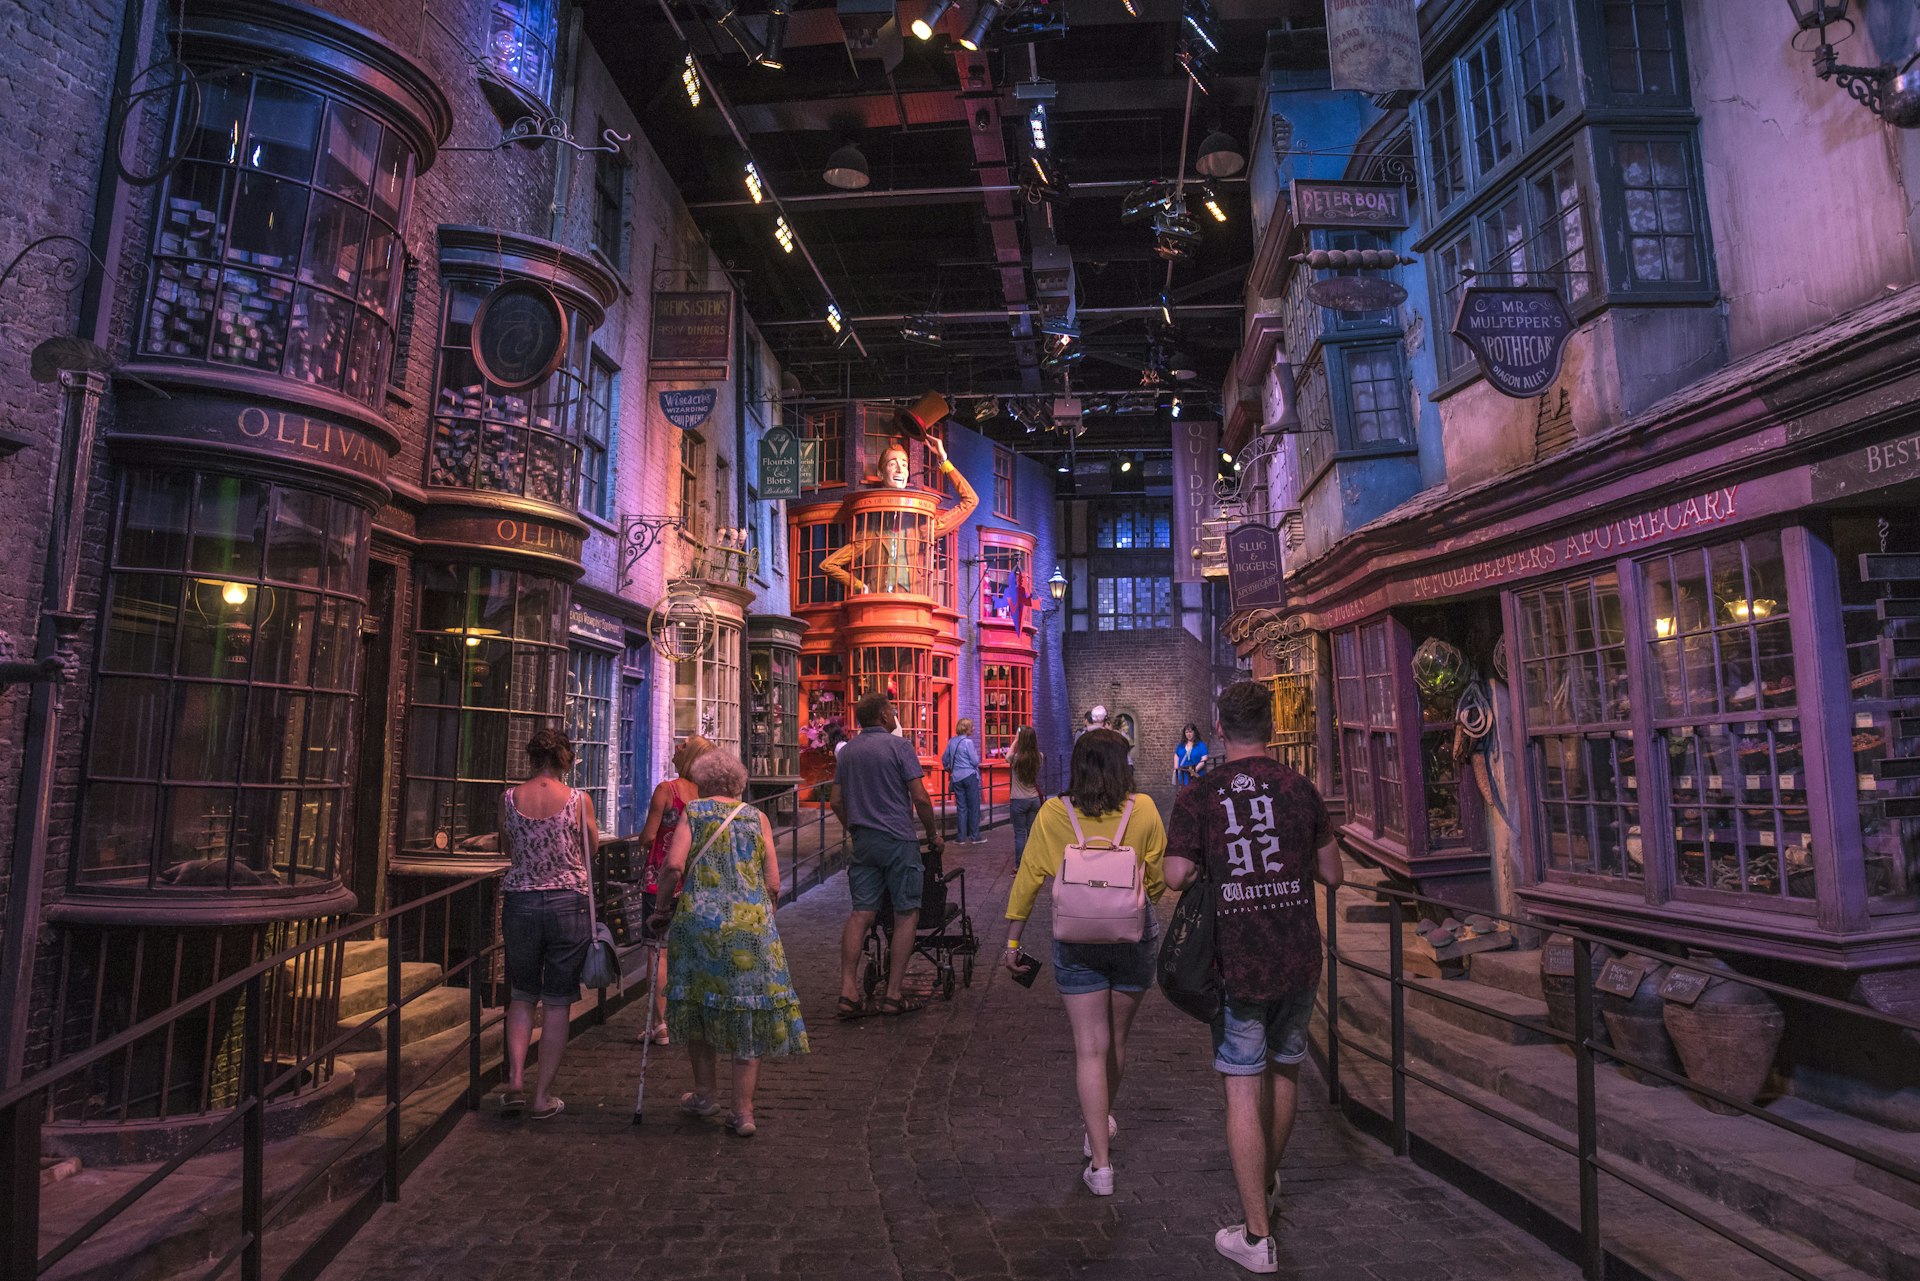 Visitors wander through the Diagon Alley movie set at the Harry Potter Studio tour inLondon